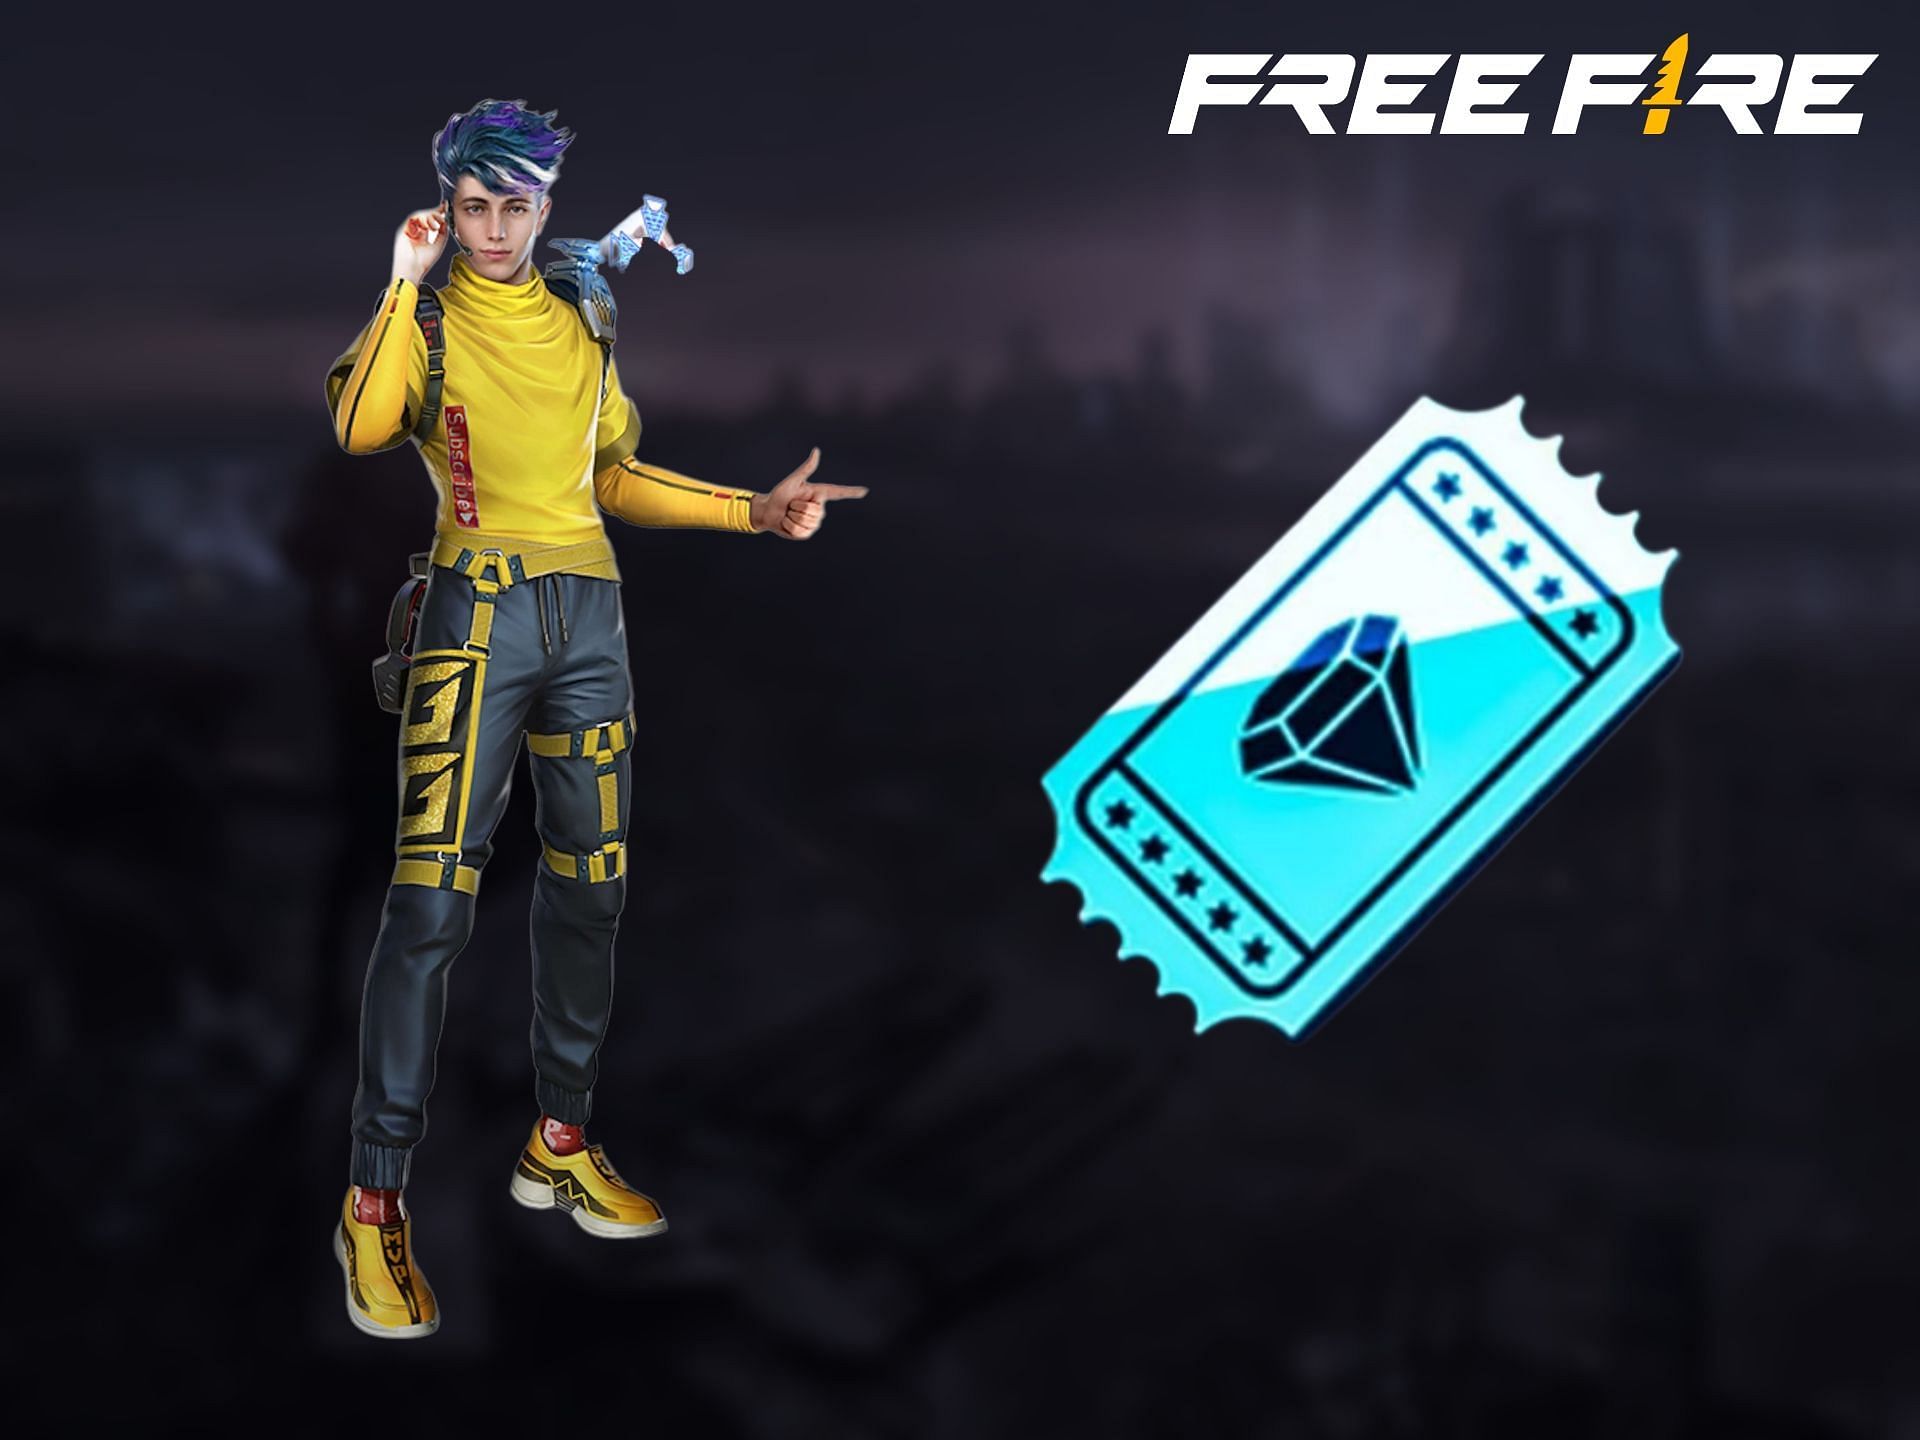 You can acquire free characters and vouchers by using the Free Fire redeem codes (Image via Garena)